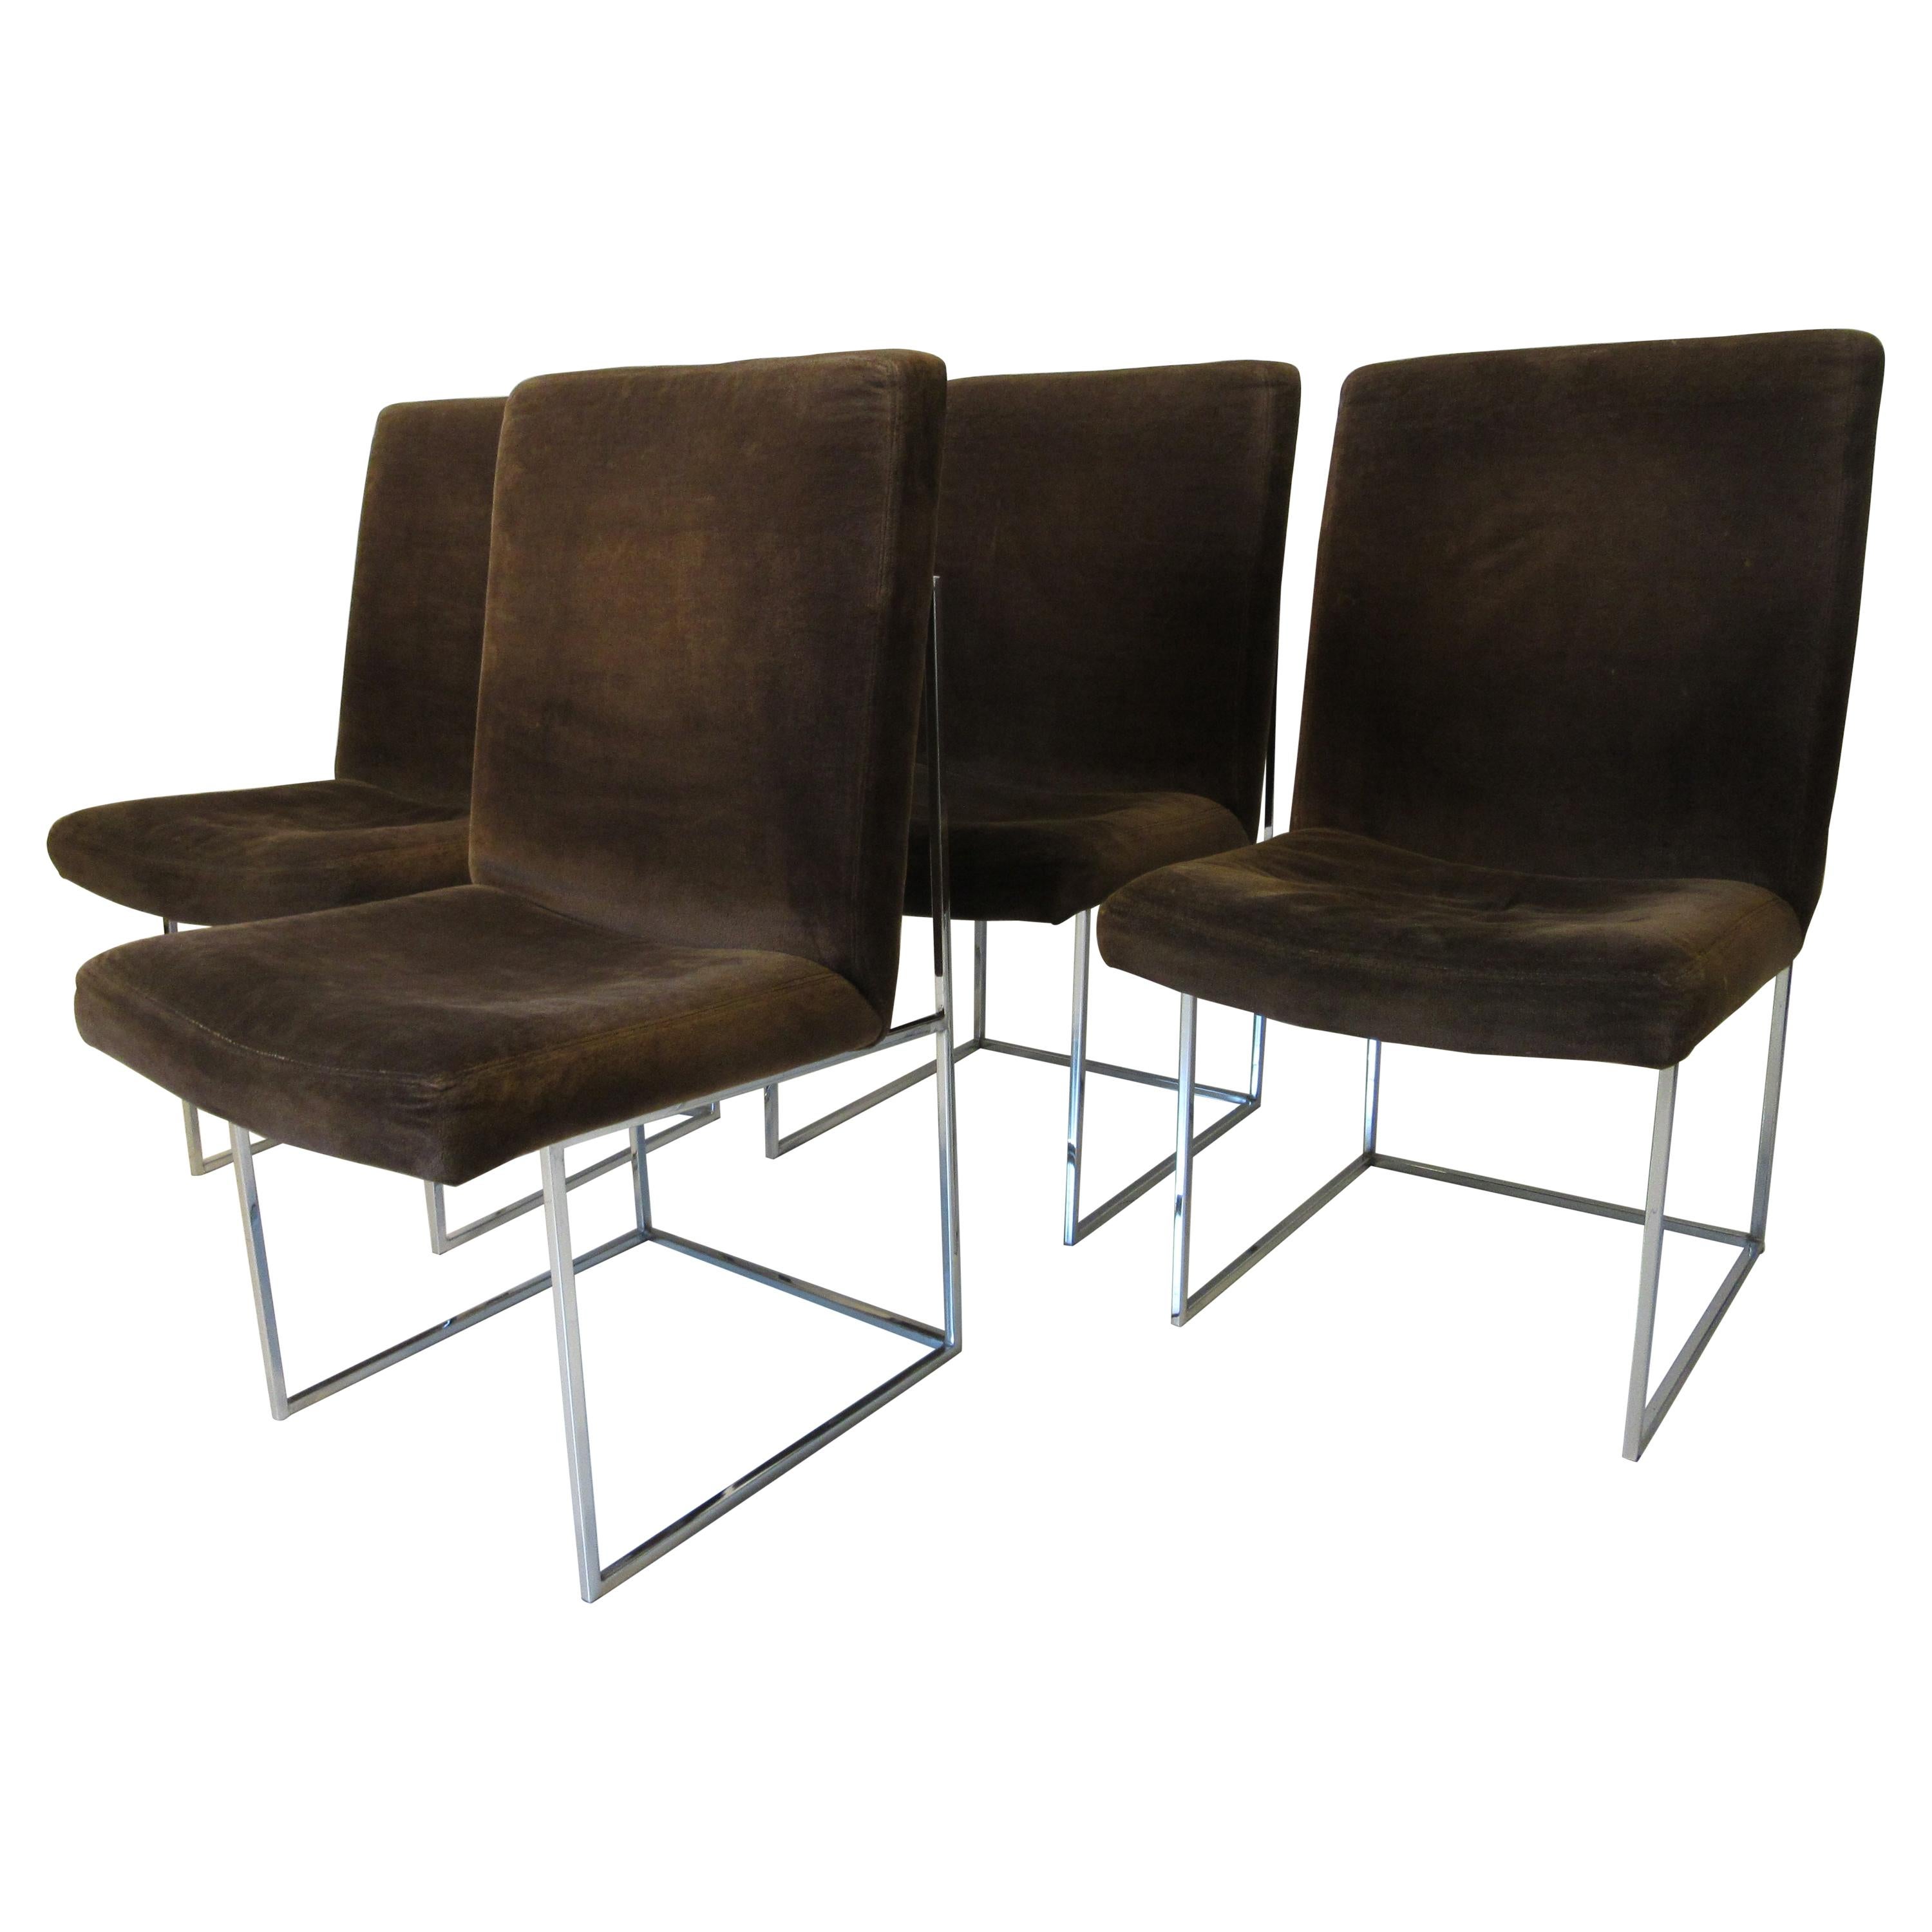 Milo Baughman Upholstered and Chrome Dining Chairs for Thayer Coggin